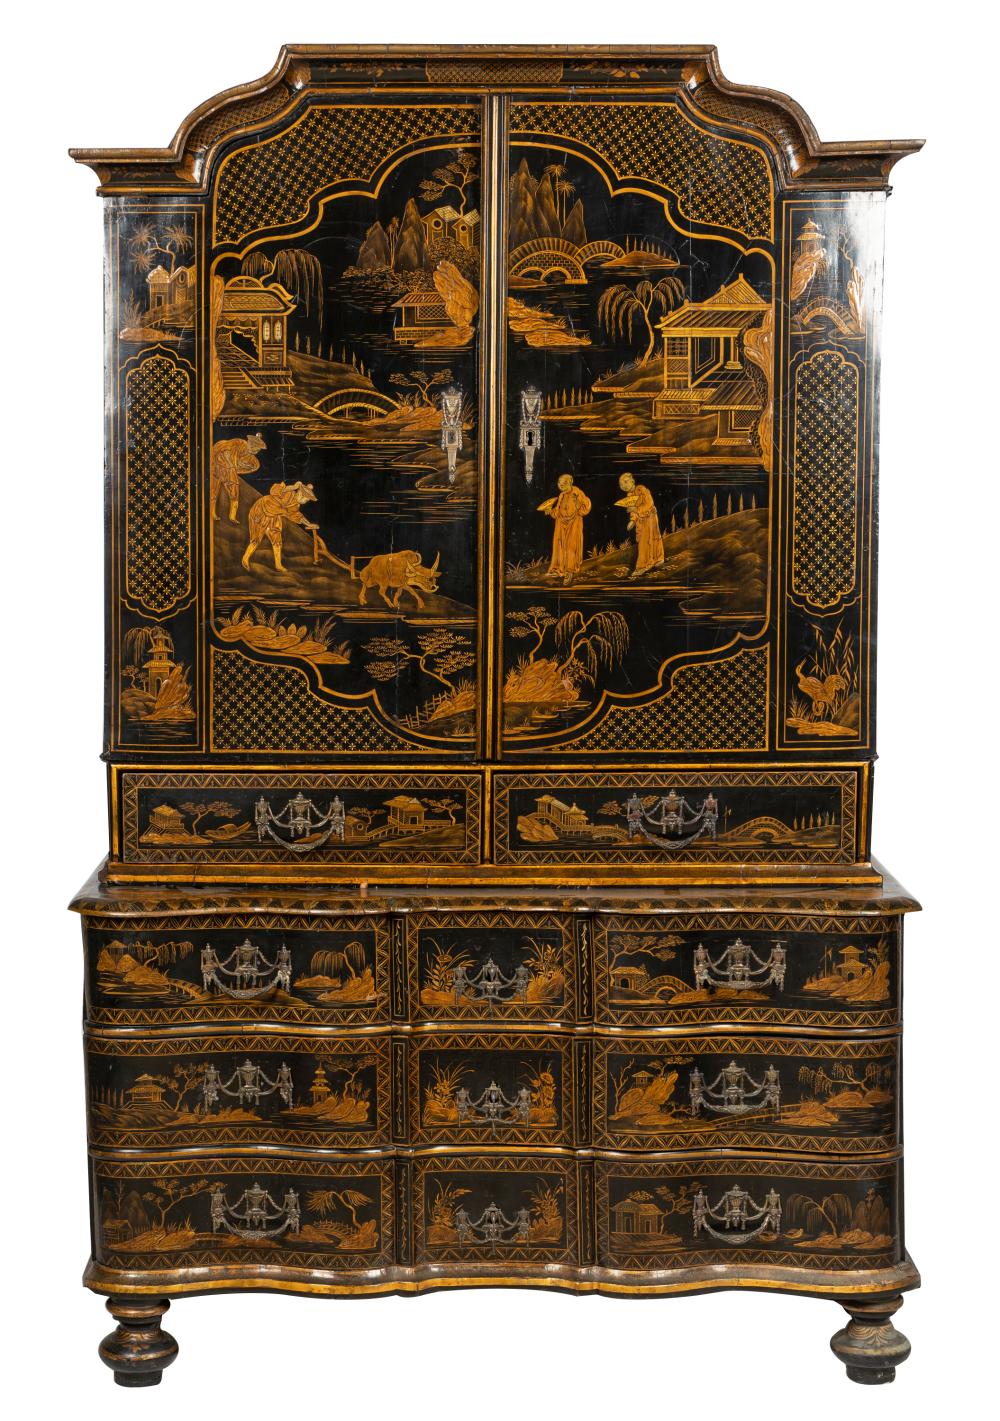 WILLIAM MARY CHINOISERIE CABINET 331cee